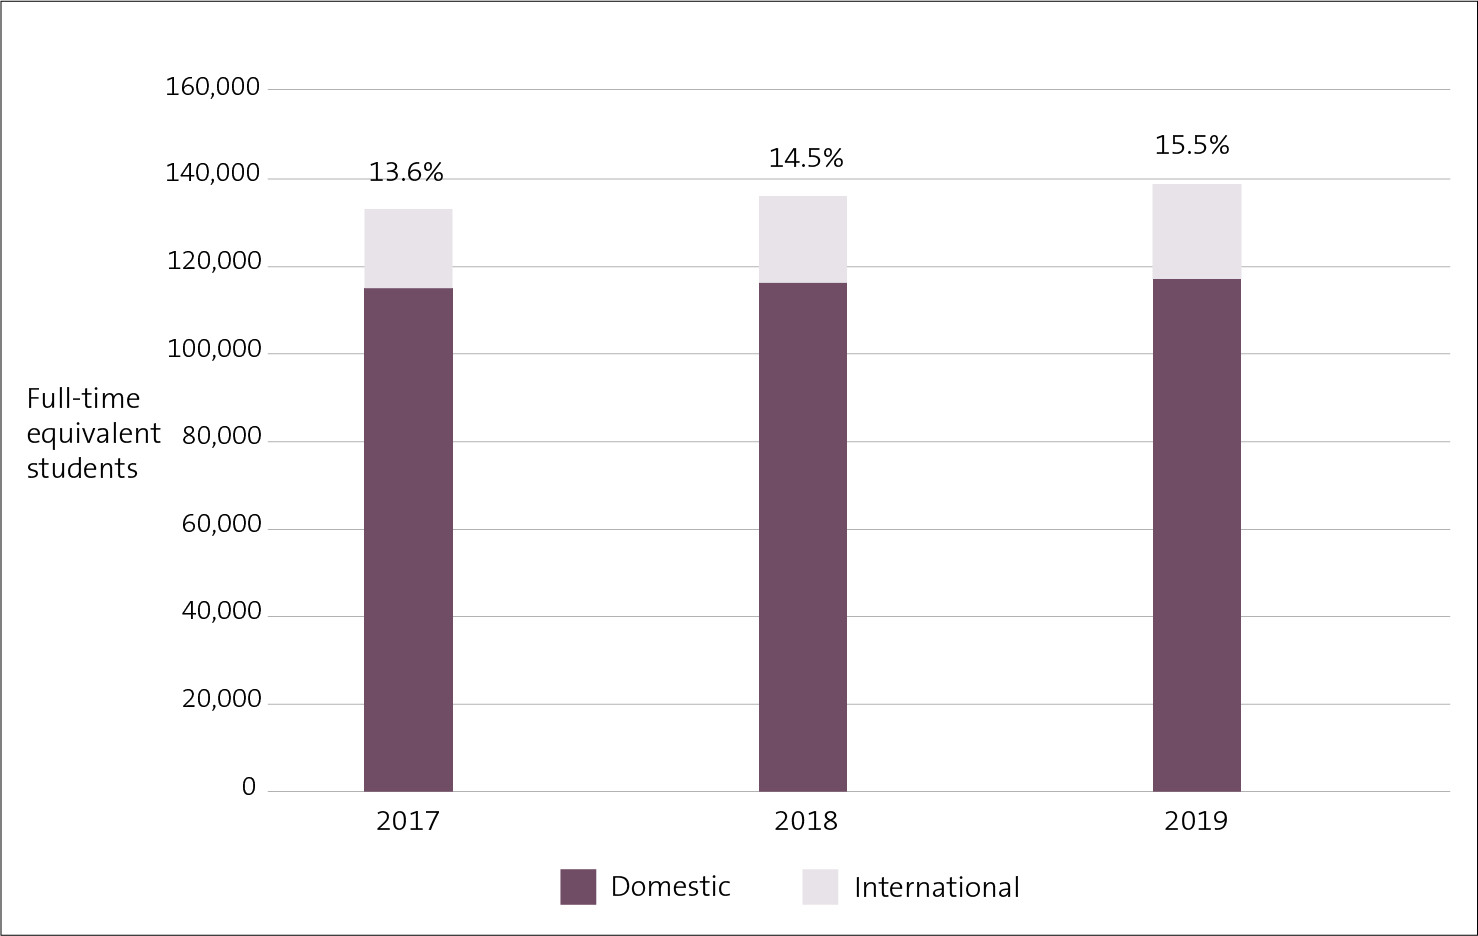 Figure 6 - Total full-time student enrolments in EFTS and the percentage of international EFTS at universities, from 2017 to 2019